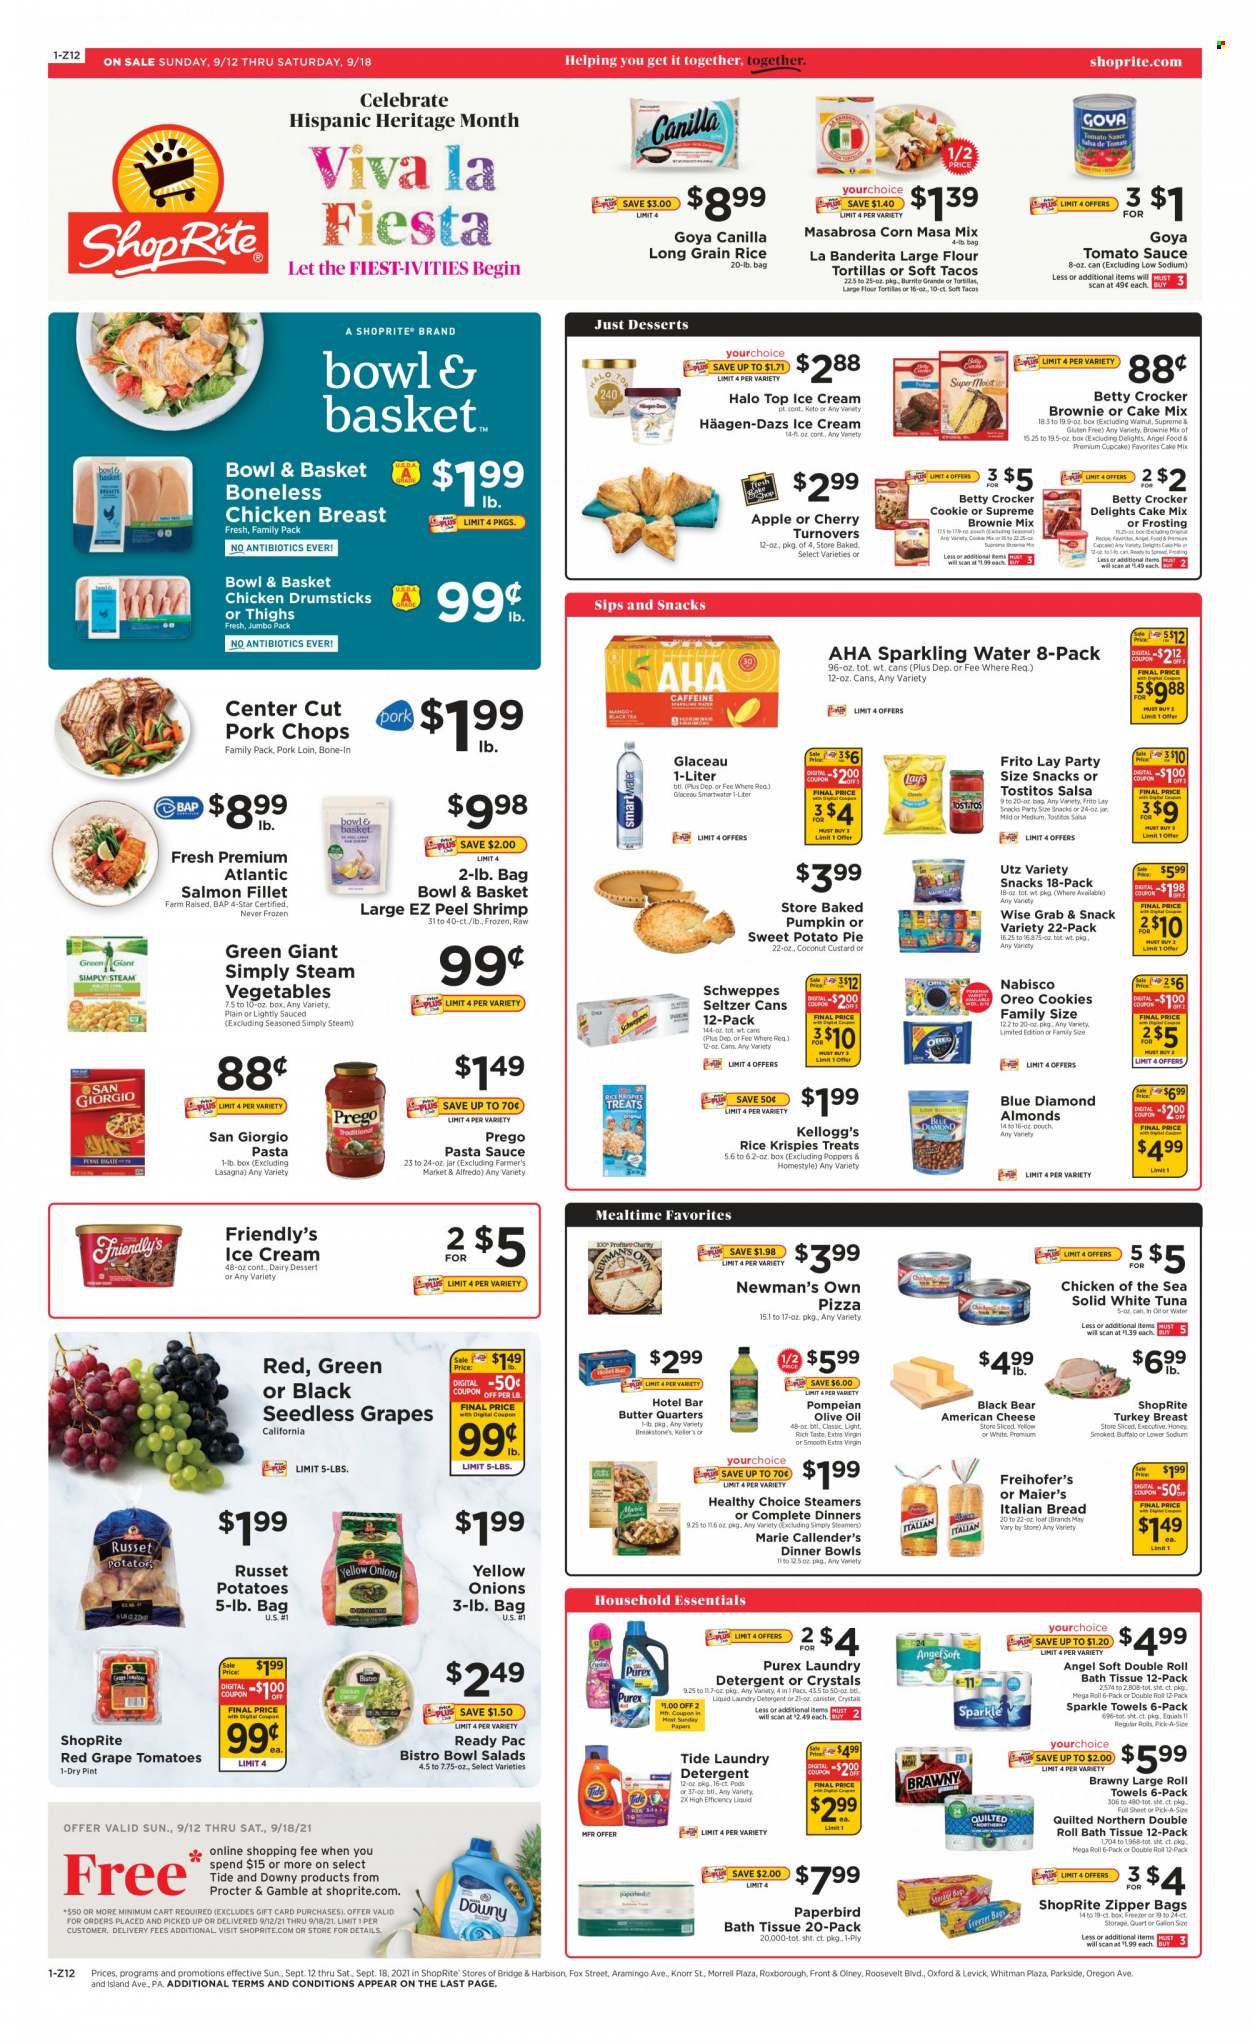 thumbnail - ShopRite Flyer - 09/12/2021 - 09/18/2021 - Sales products - seedless grapes, bread, tortillas, tacos, Bowl & Basket, turnovers, flour tortillas, cupcake, Angel Food, brownie mix, cake mix, corn, russet potatoes, sweet potato, potatoes, onion, salmon, salmon fillet, tuna, shrimps, pizza, pasta sauce, Knorr, sauce, burrito, Healthy Choice, Marie Callender's, Ready Pac, american cheese, custard, Oreo, butter, ice cream, Häagen-Dazs, Friendly's Ice Cream, Kellogg's, Tostitos, frosting, tomato sauce, Chicken of the Sea, Goya, Rice Krispies, long grain rice, salsa, extra virgin olive oil, olive oil, honey, almonds, Blue Diamond, Schweppes, seltzer water, sparkling water, Smartwater, turkey breast, chicken breasts, chicken drumsticks, pork chops, pork loin, pork meat, bath tissue, Quilted Northern, paper towels, detergent, Tide, laundry detergent, Purex. Page 1.